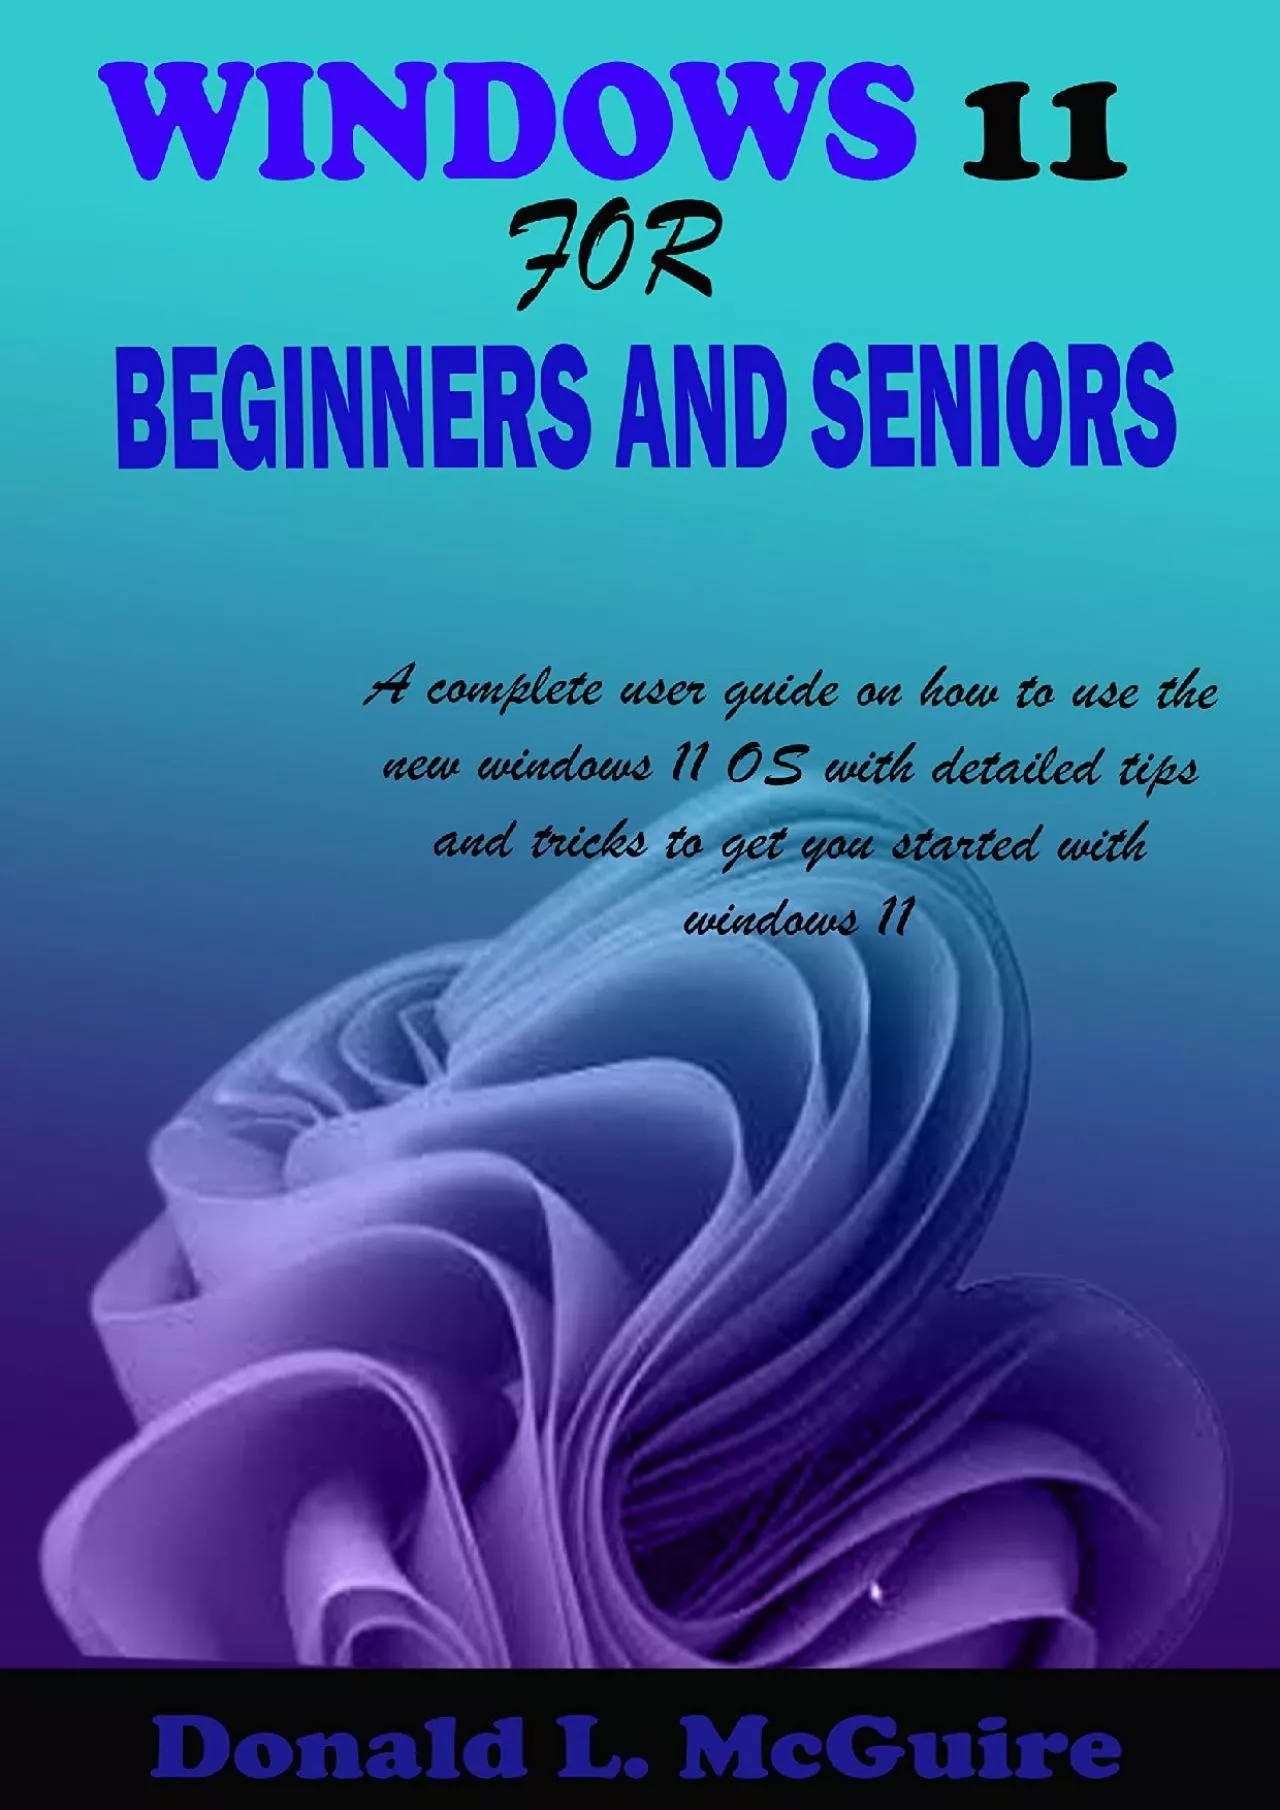 WINDOWS  FOR BEGINNERS AND SENIORS A complete user guide on how to use the new windows